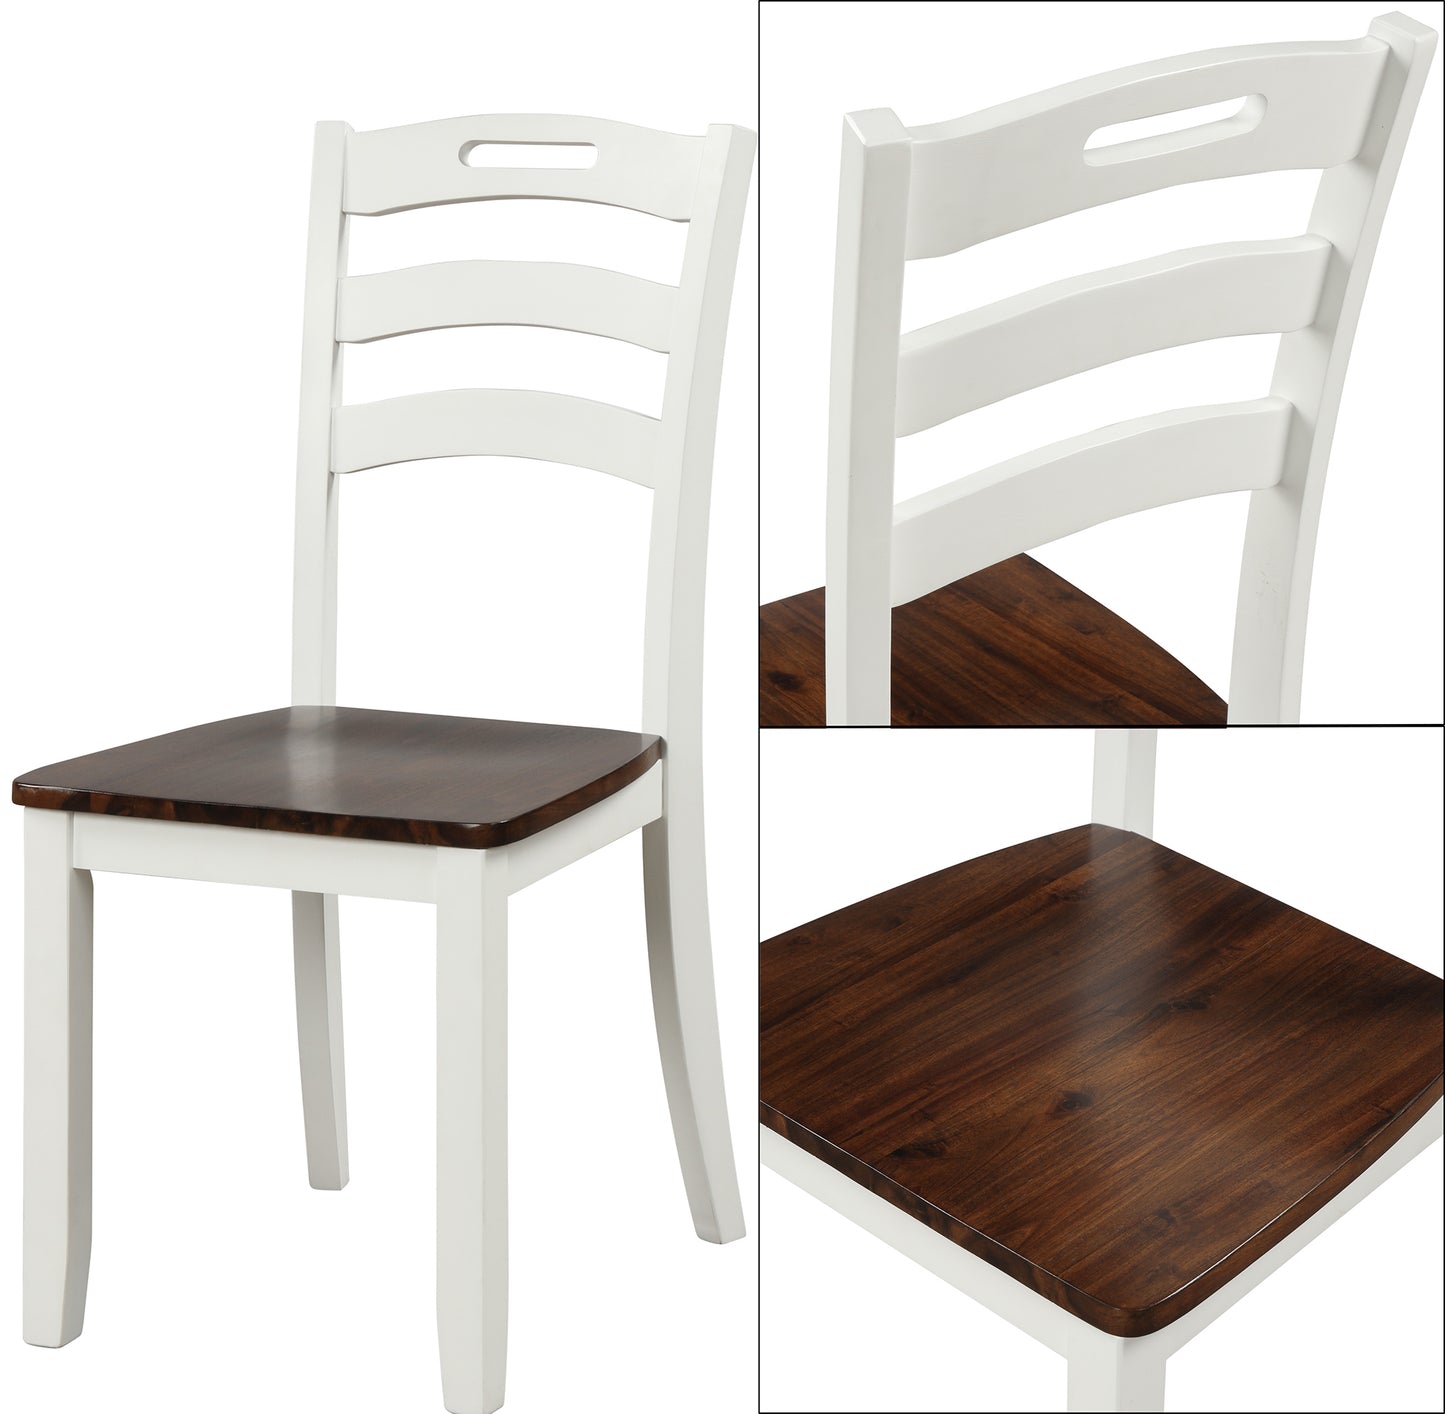 DiPoli 6 Piece Dining Table Set with Bench